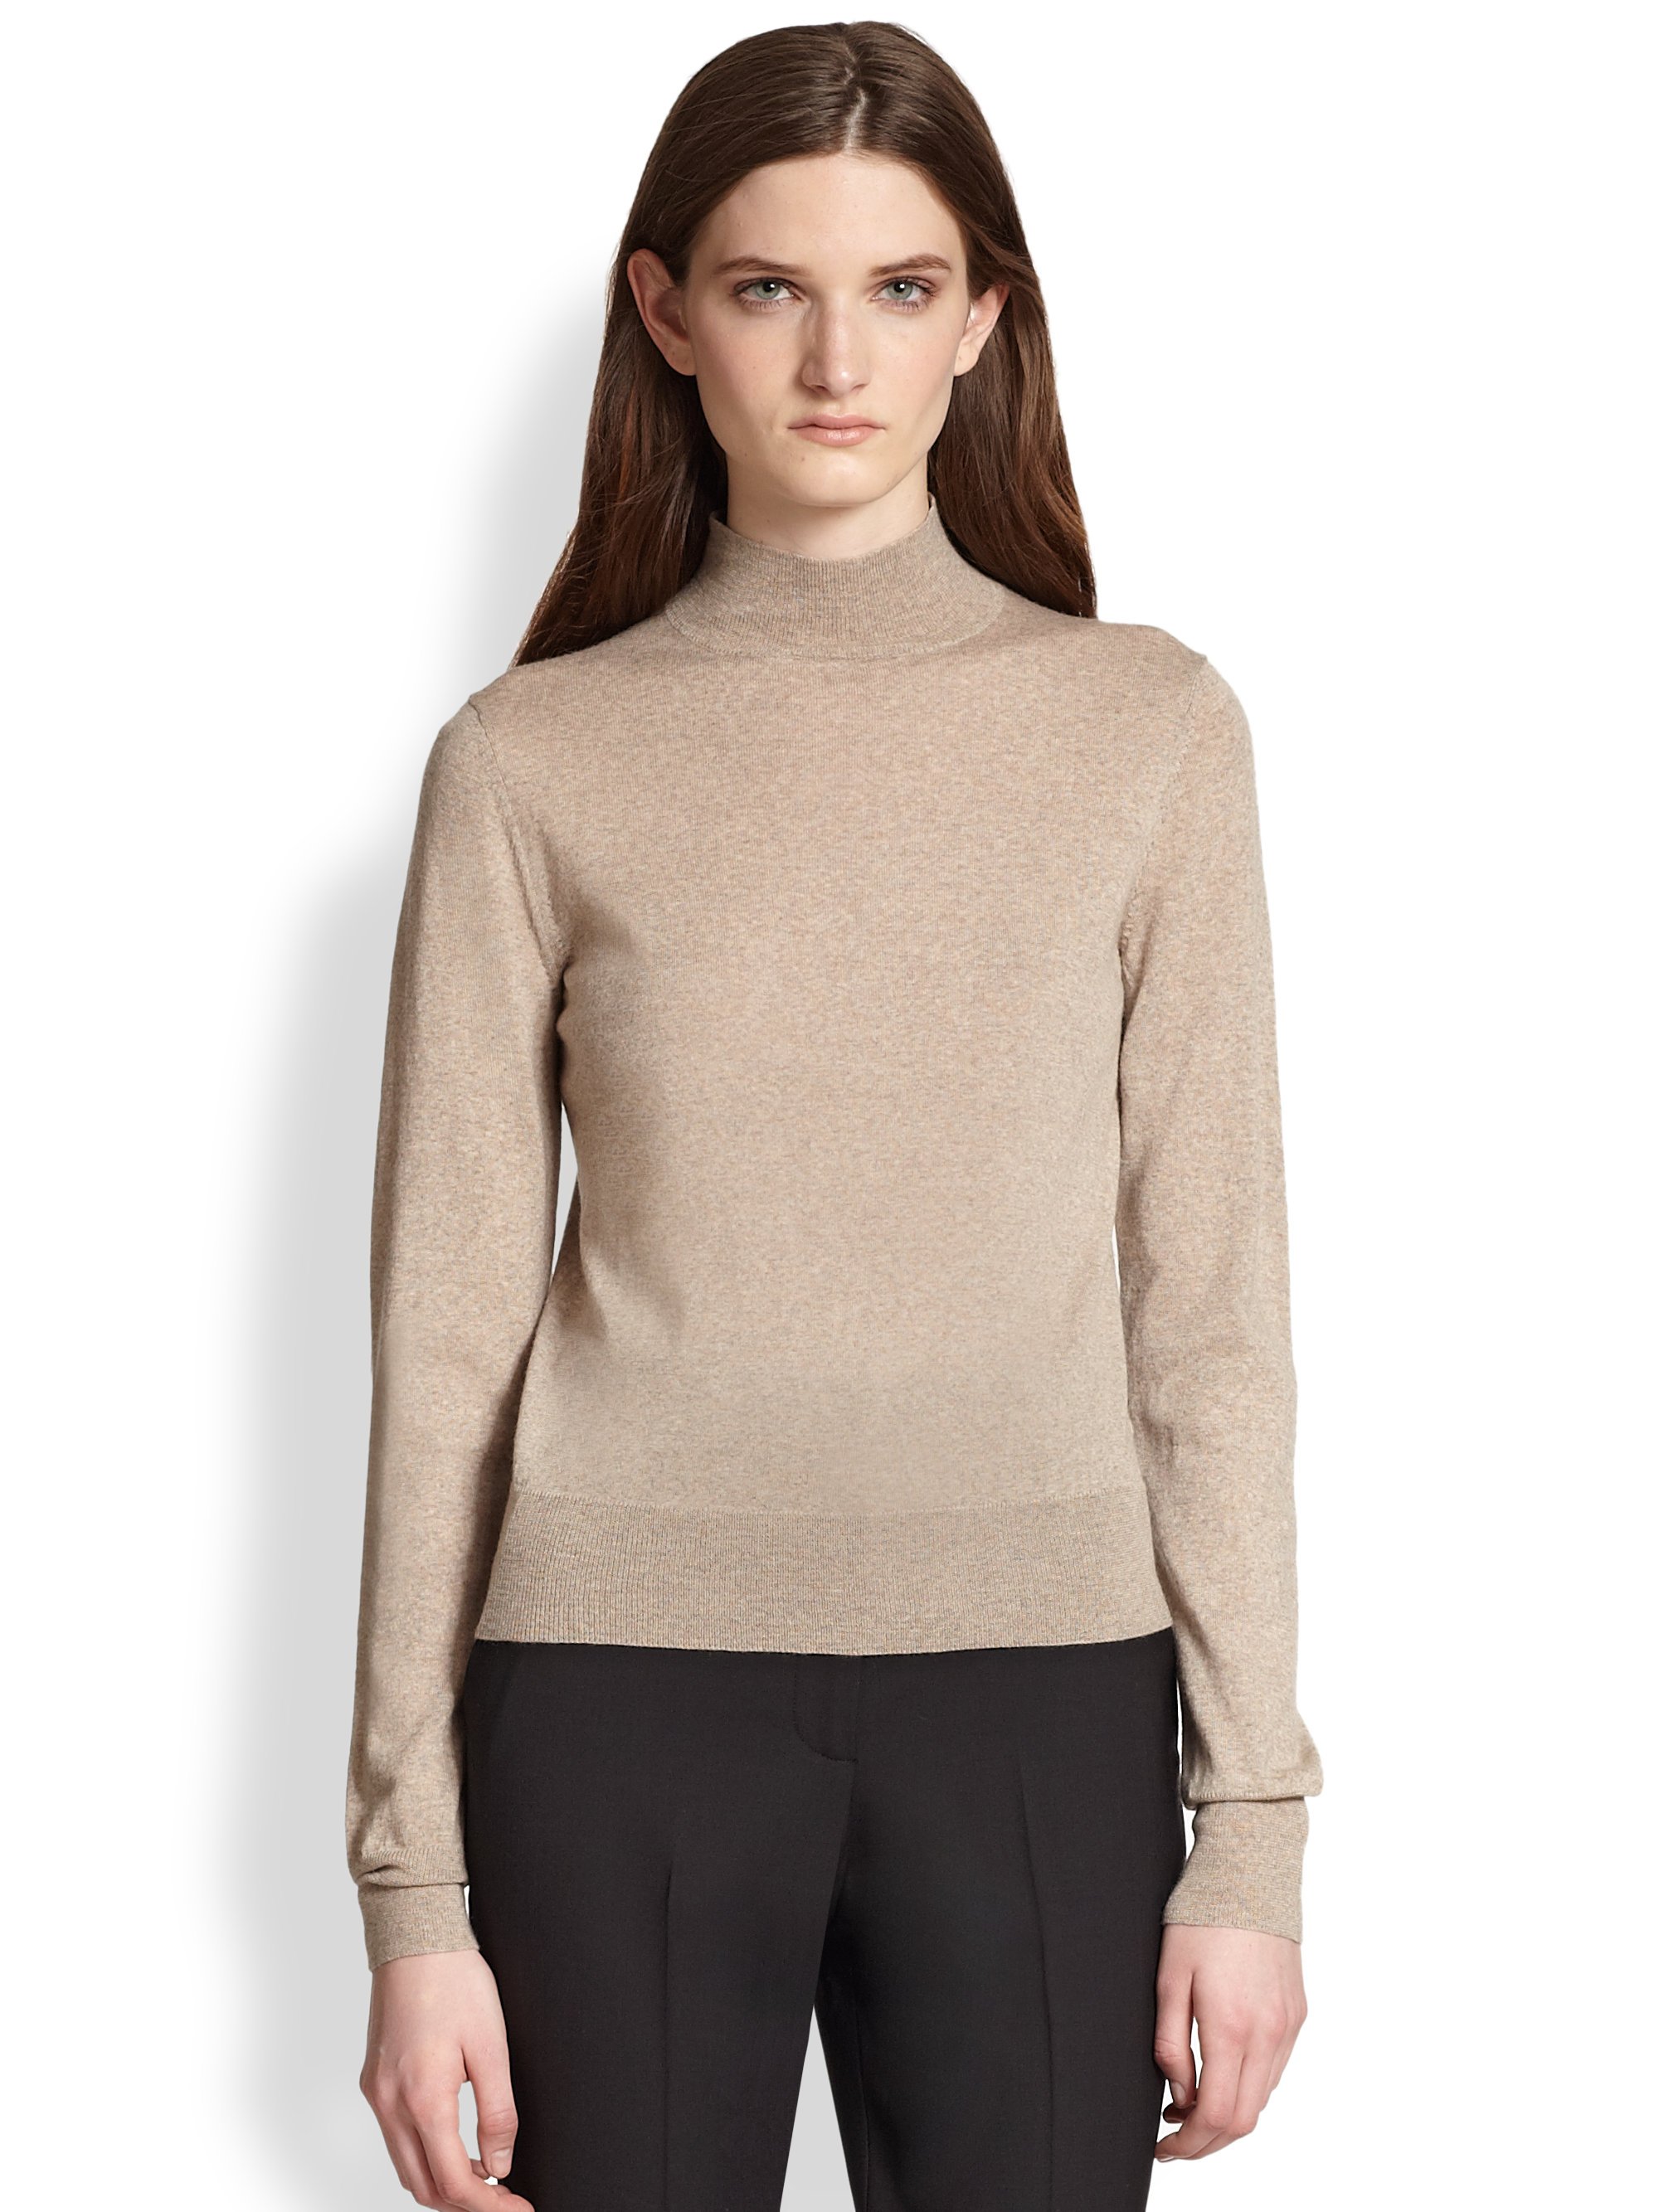 Lyst - Theory Sallie Wool Mock Turtleneck Sweater in Natural